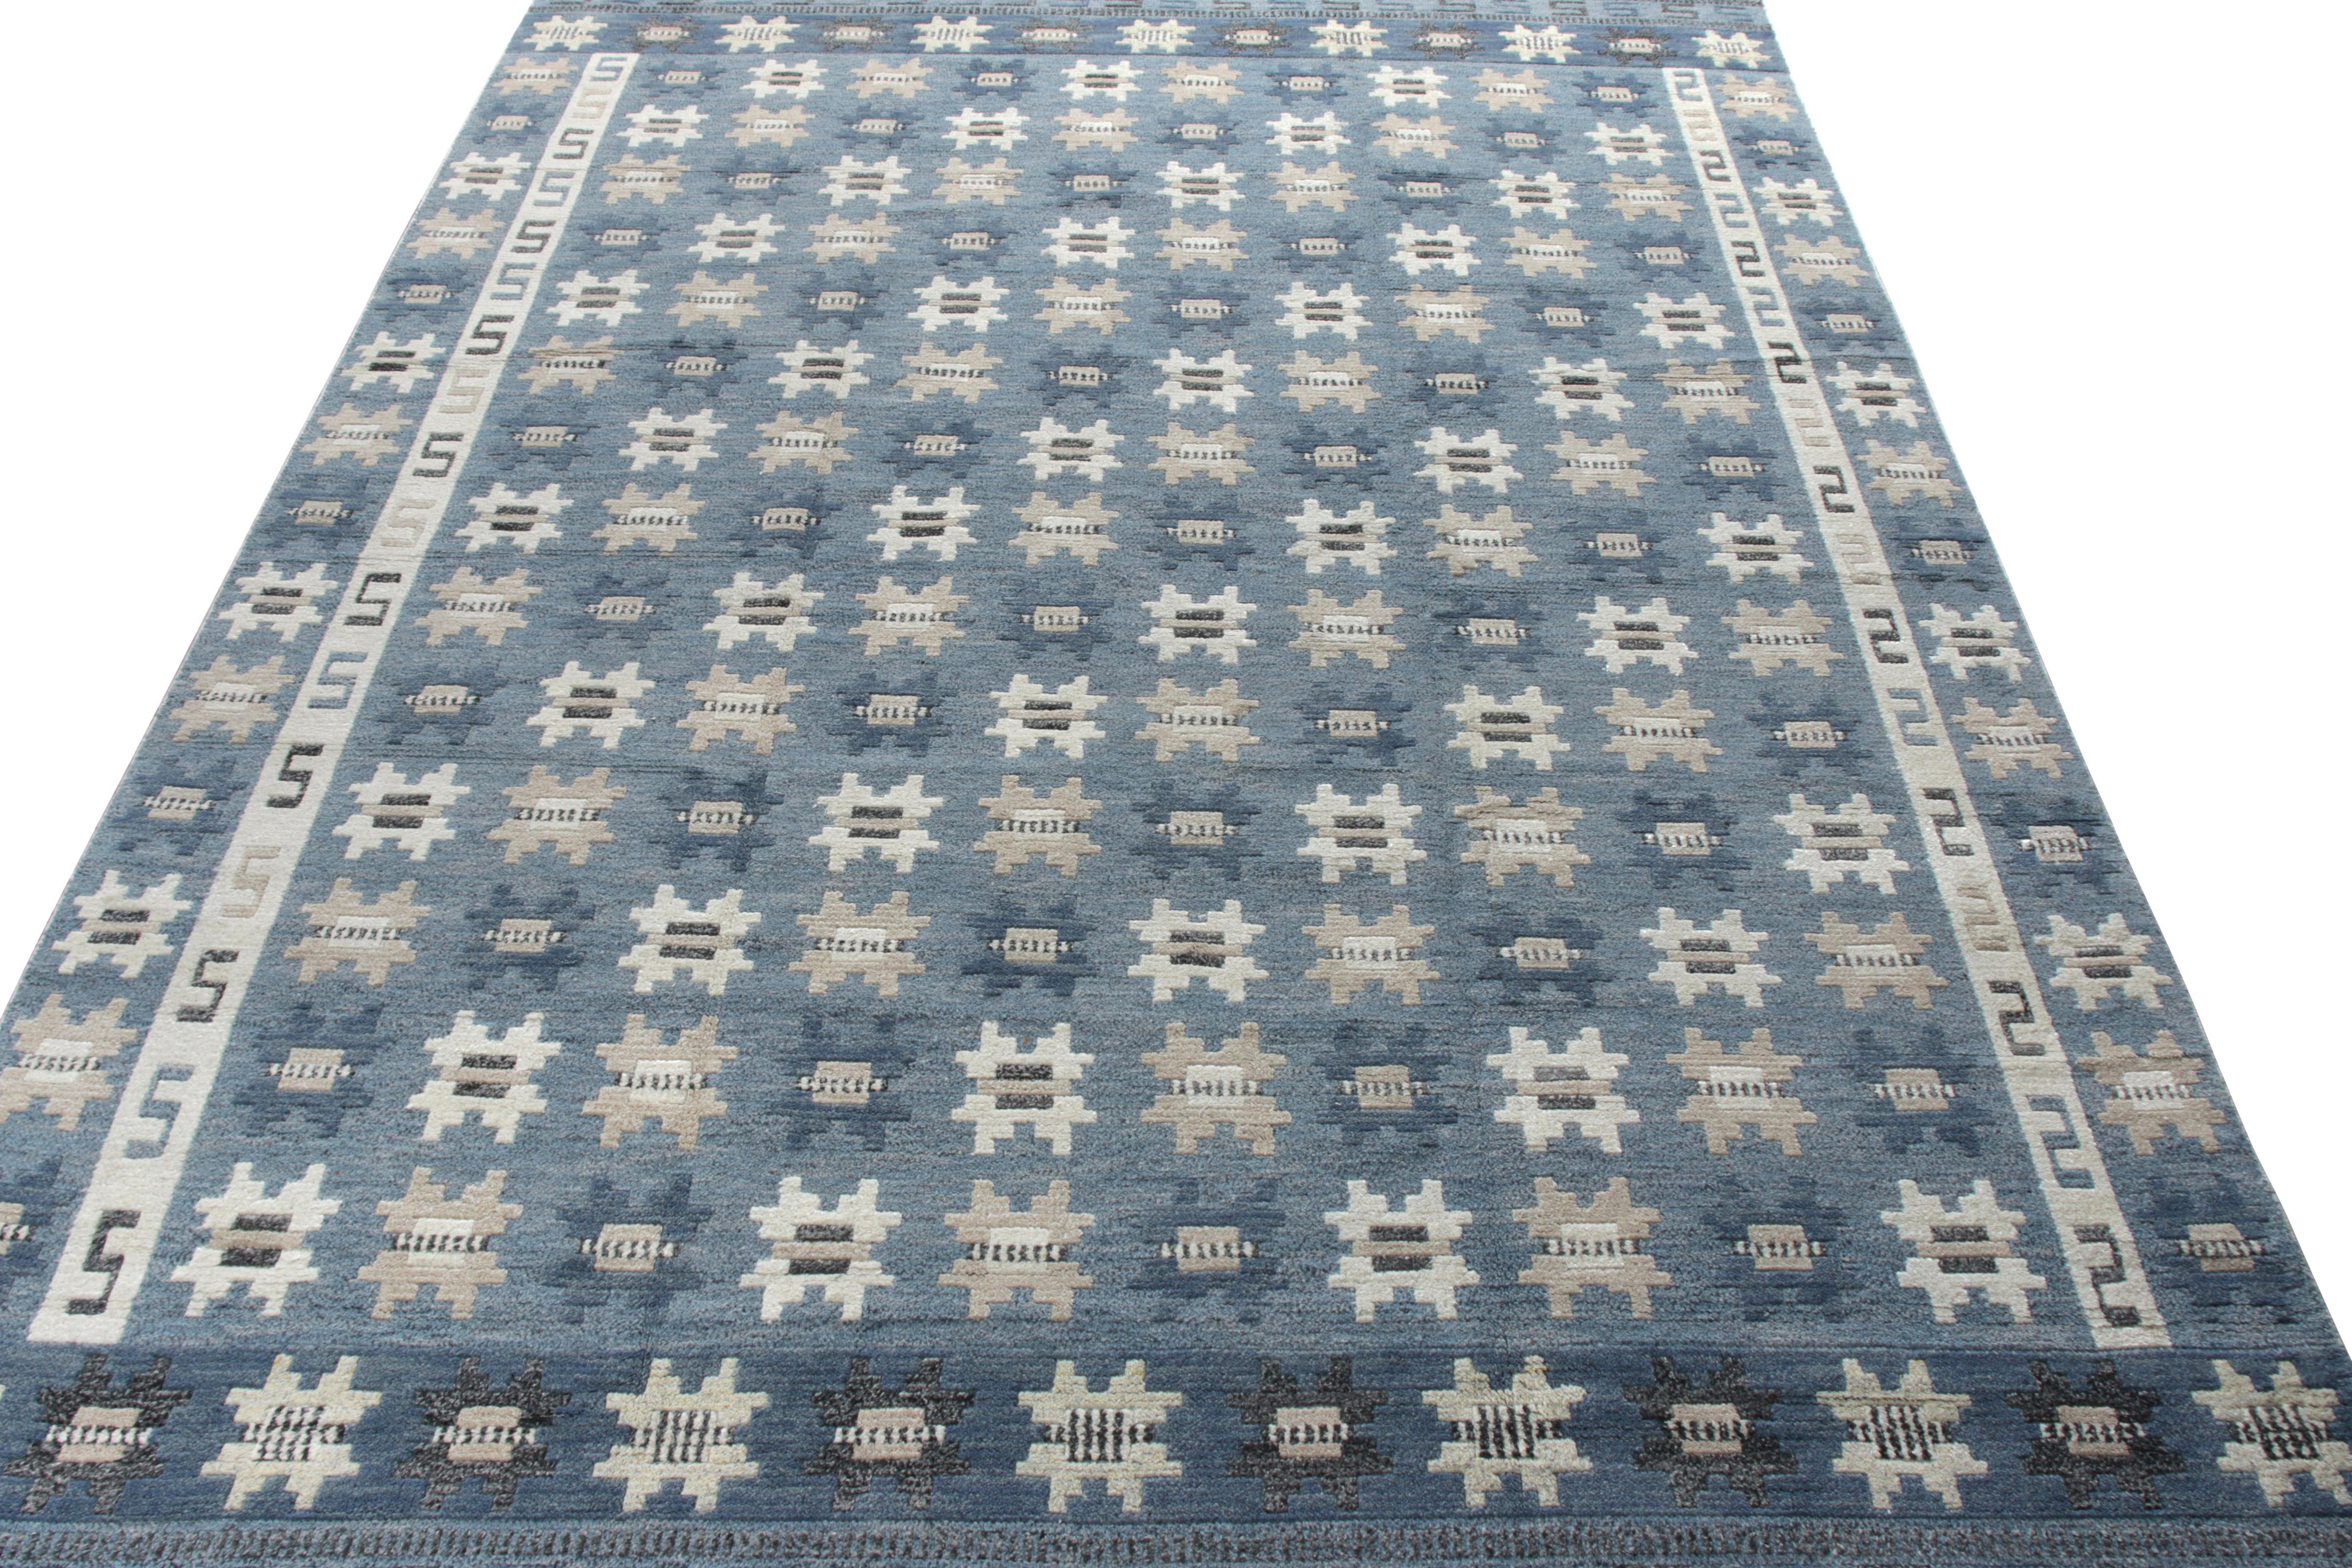 A scintillating 10x14 piece from Rug & Kilim’s Scandinavian Collection. Hand-knotted in wool with a skillful a high-low texture, this pile features a repetitive geometric that runs in gray and white on a blue background, playing perfectly with the